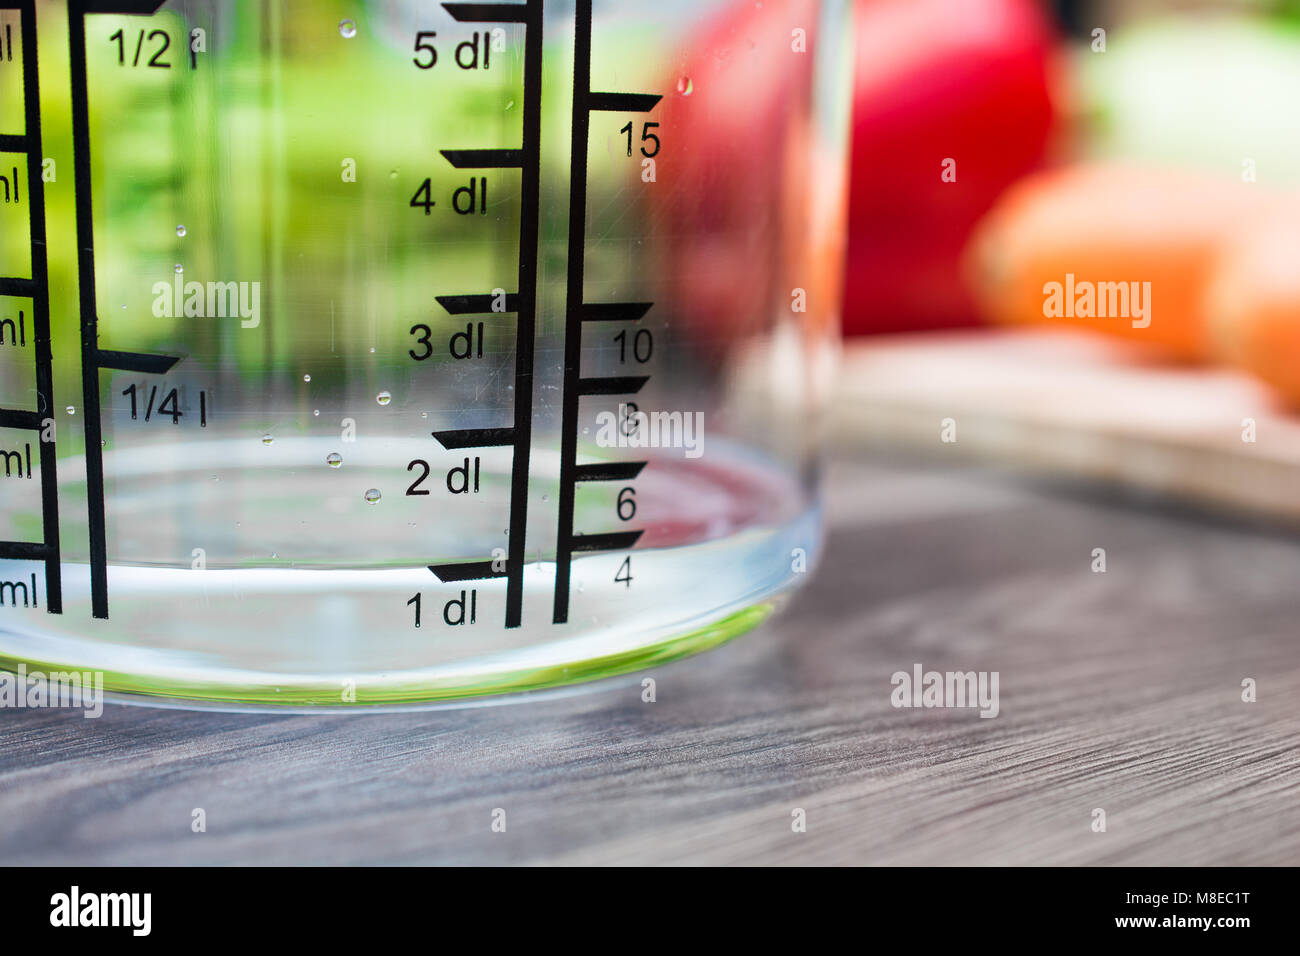 100ml / 1dl Of Water In A Measuring Cup On A Kitchen Counter With Vegetables Stock Photo